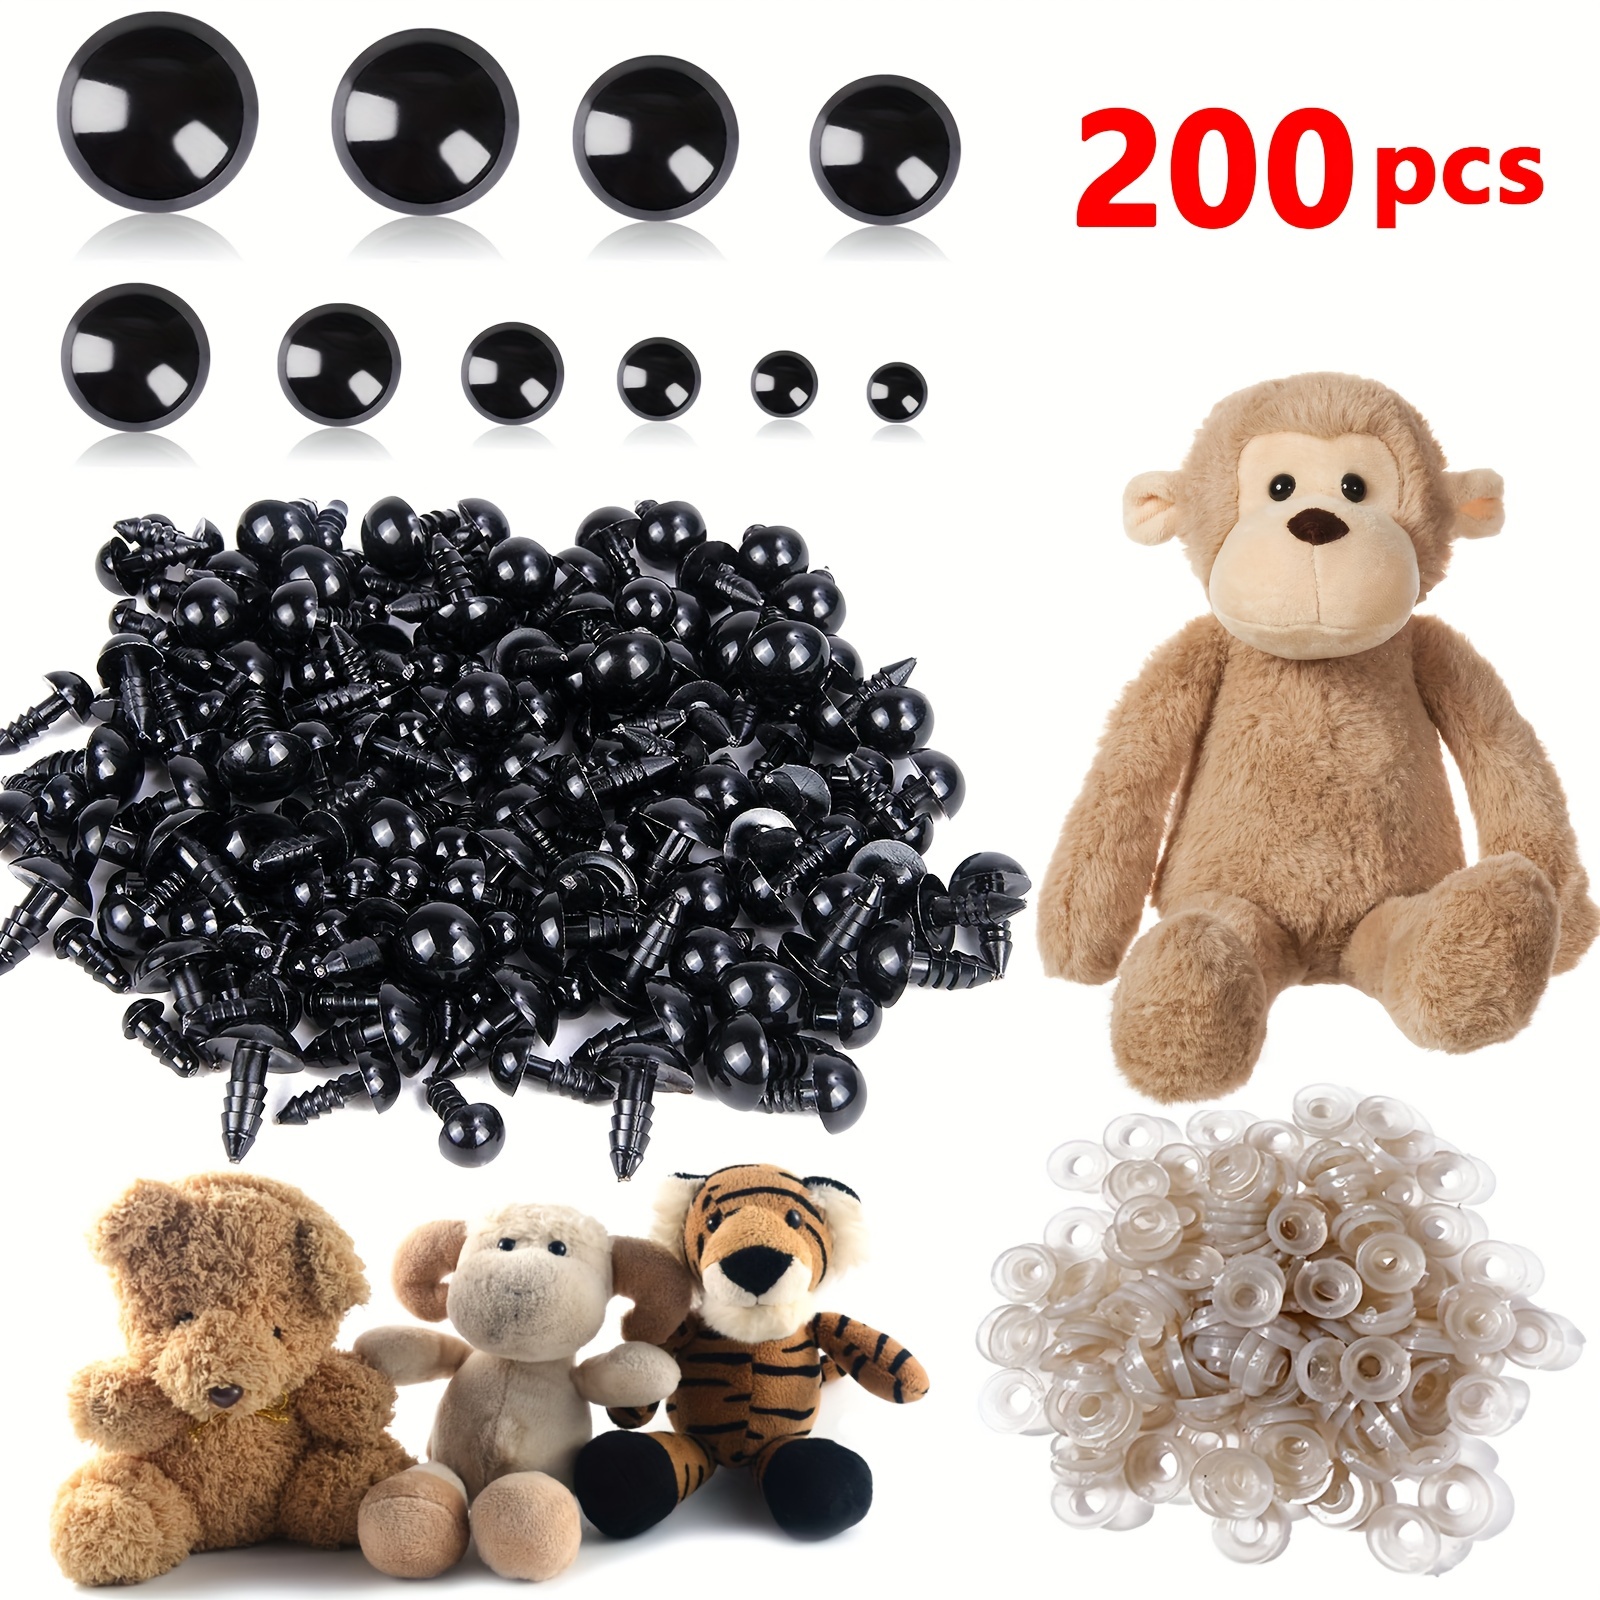 560pcs Plastic Safety Eyes And Noses For Amigurumi Crochet Crafts Dolls  Stuffed Animals And Teddy Bear, Multiple